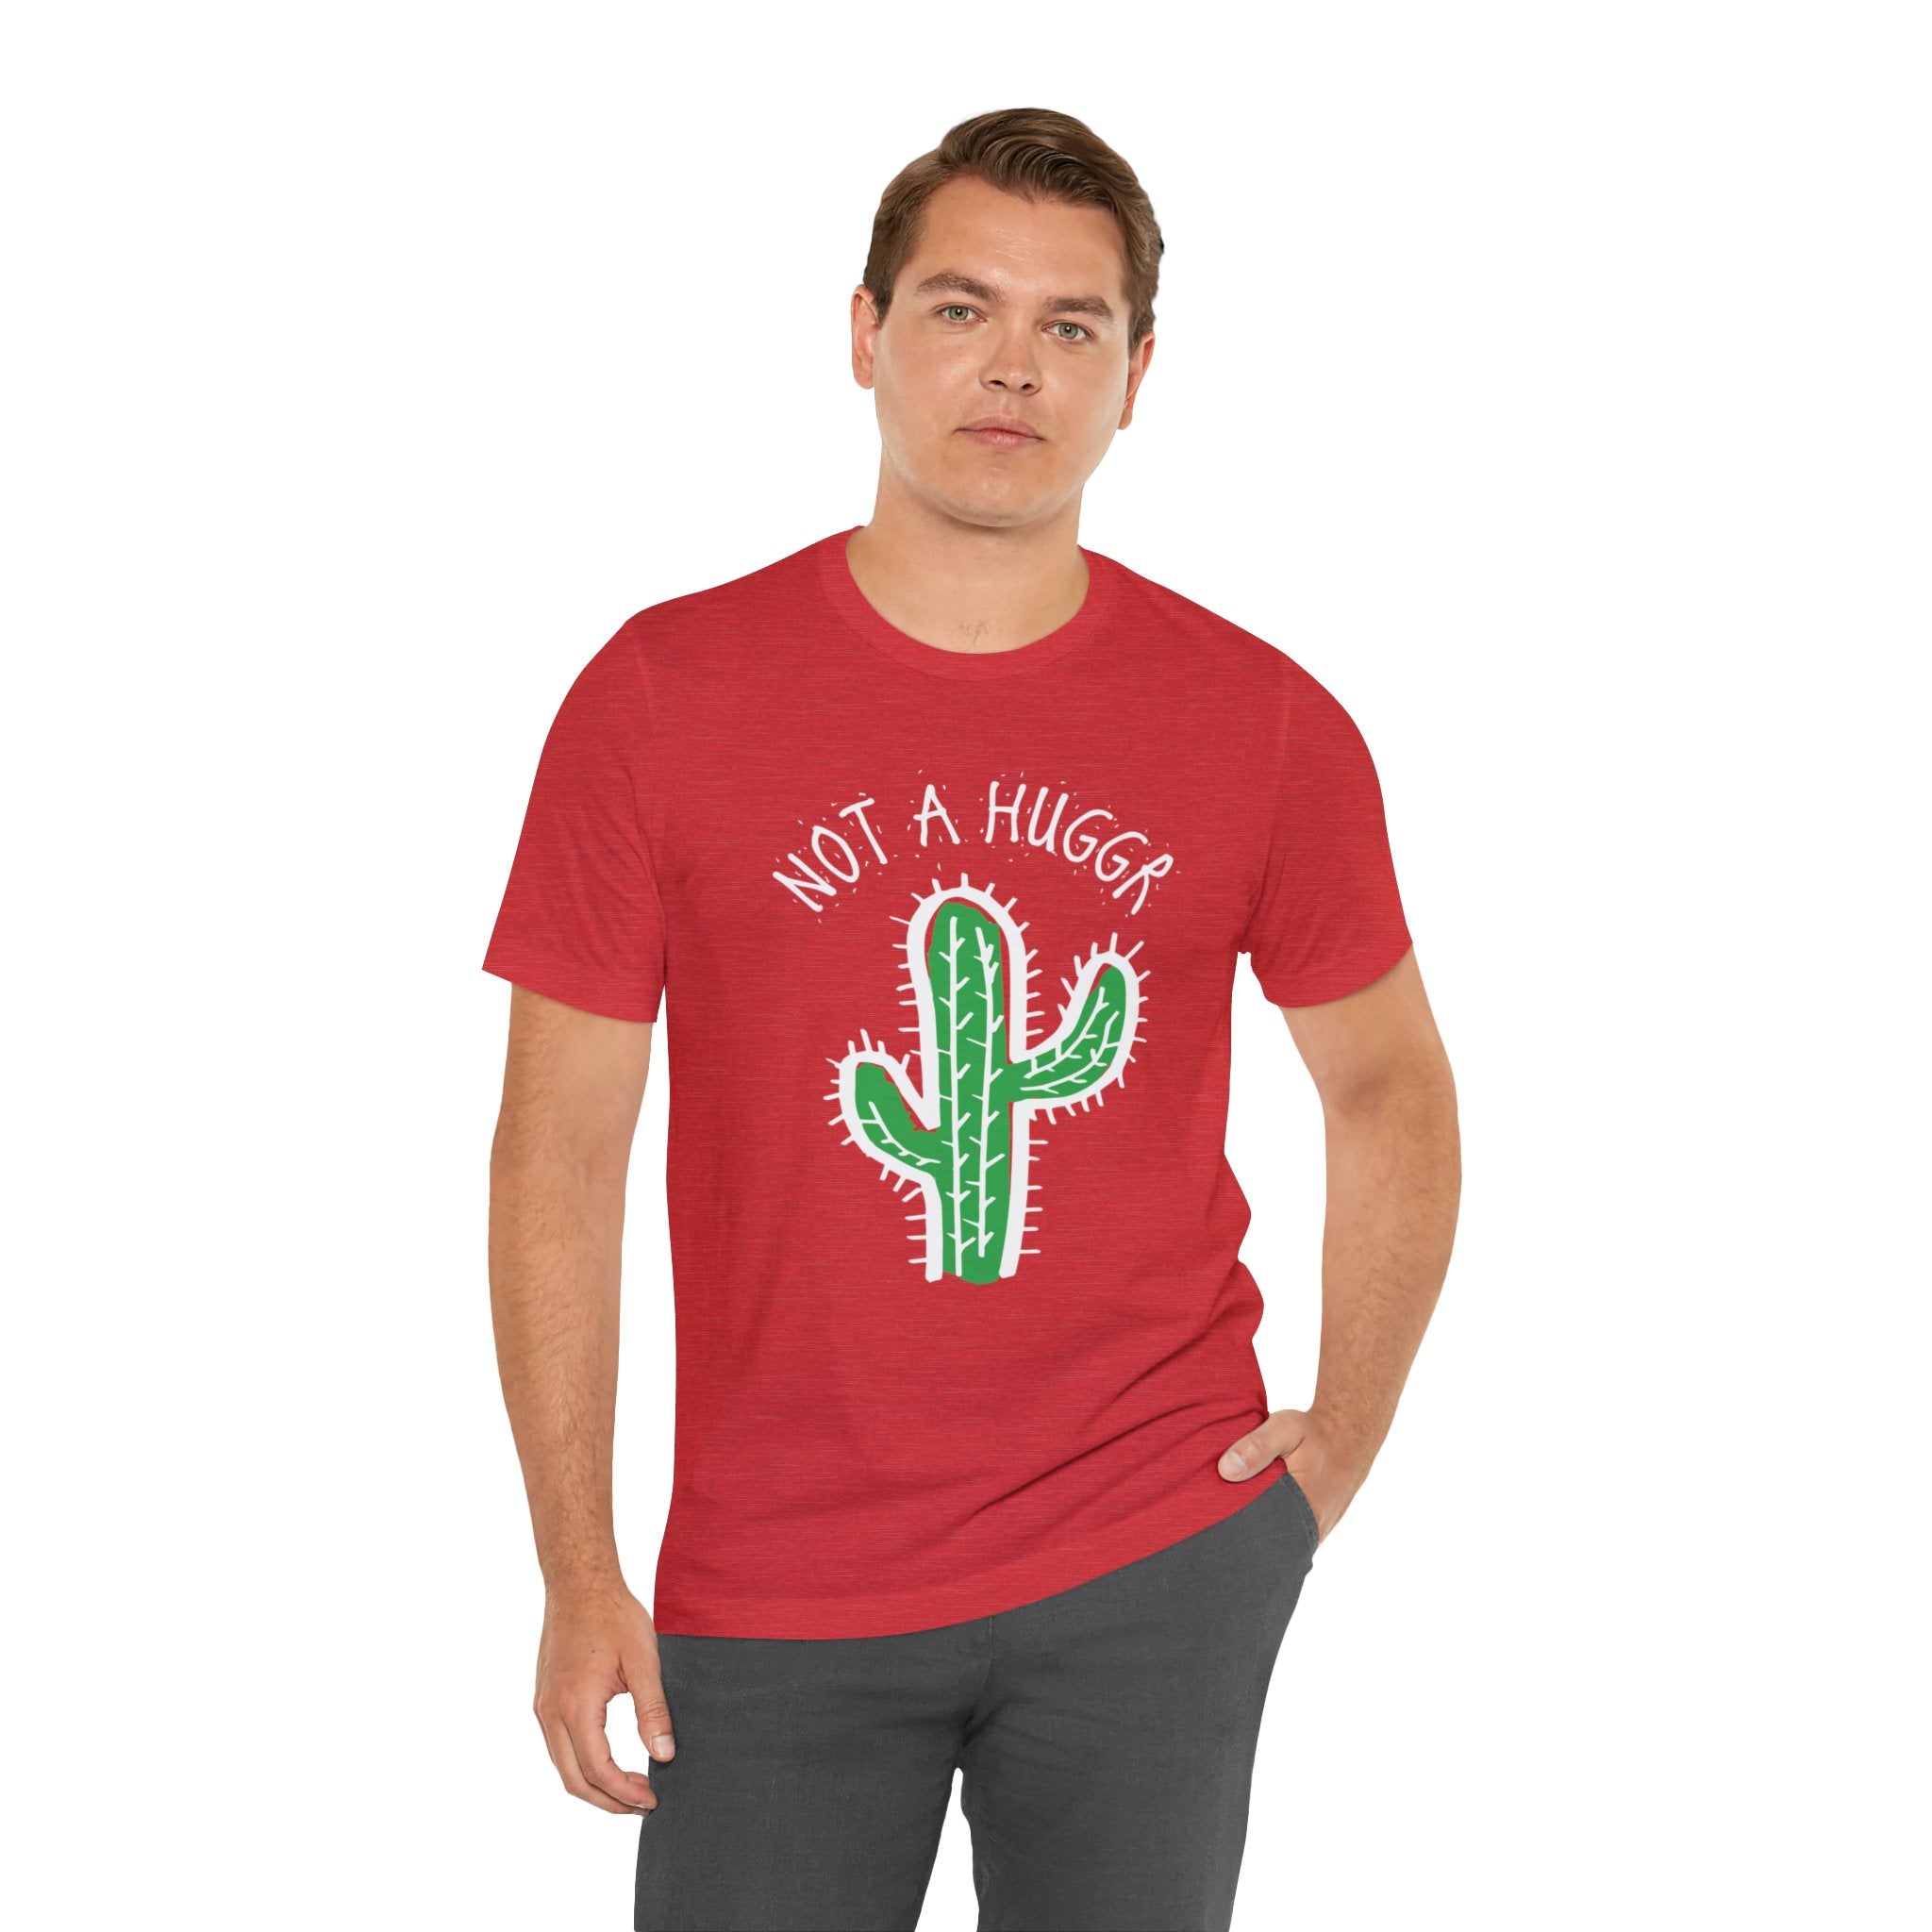 A trendy man wearing a red Not a Hugger T-Shirt with a cactus on it while respecting personal space.